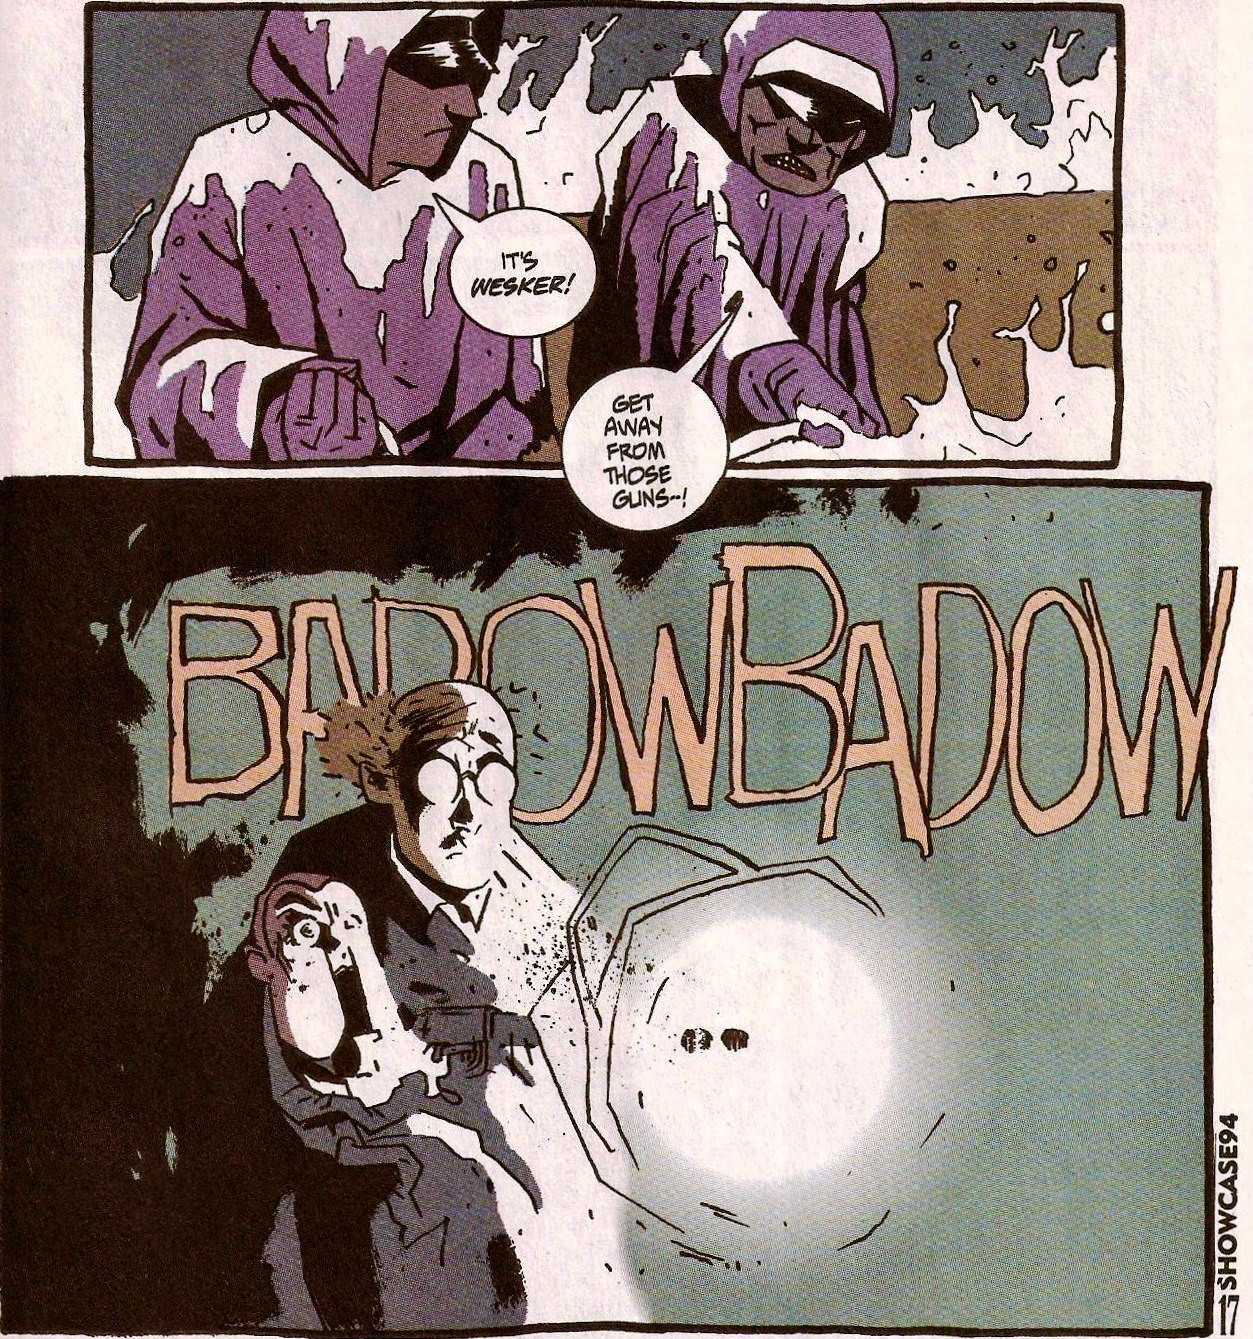 From Showcase '94 #9 (1994)